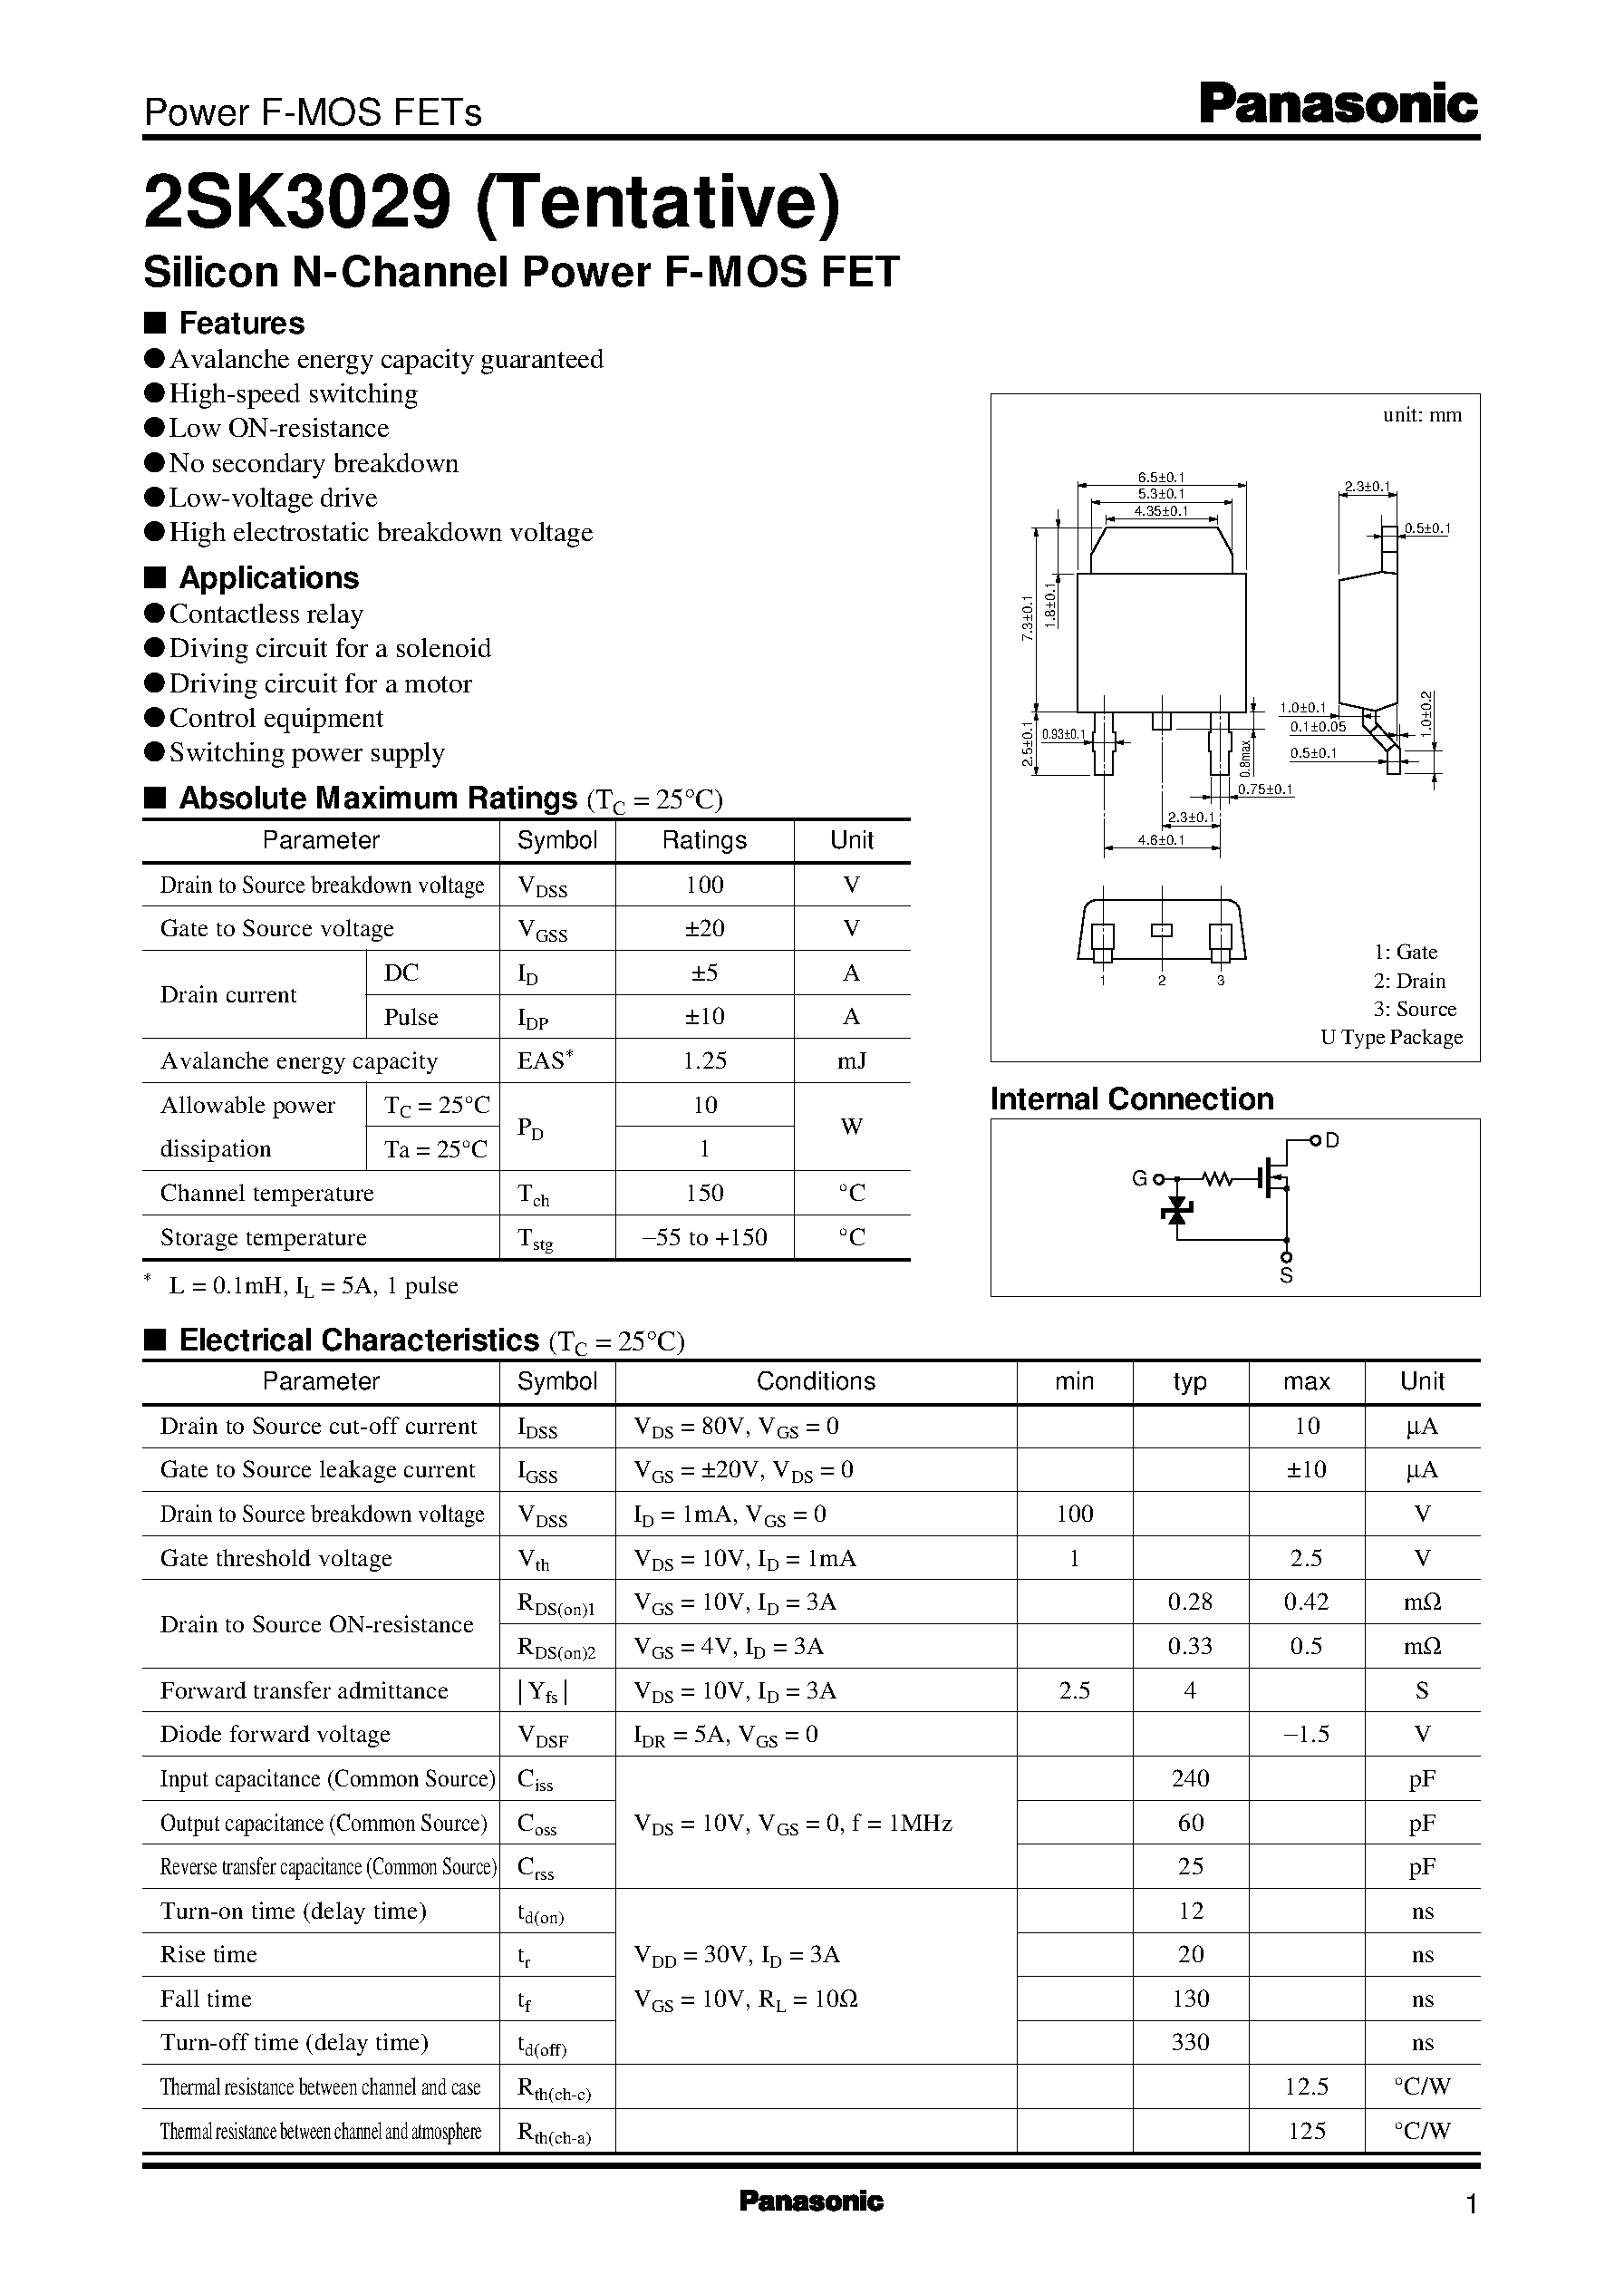 Datasheet 2SK3029 - Silicon N-Channel Power F-MOS FET page 1